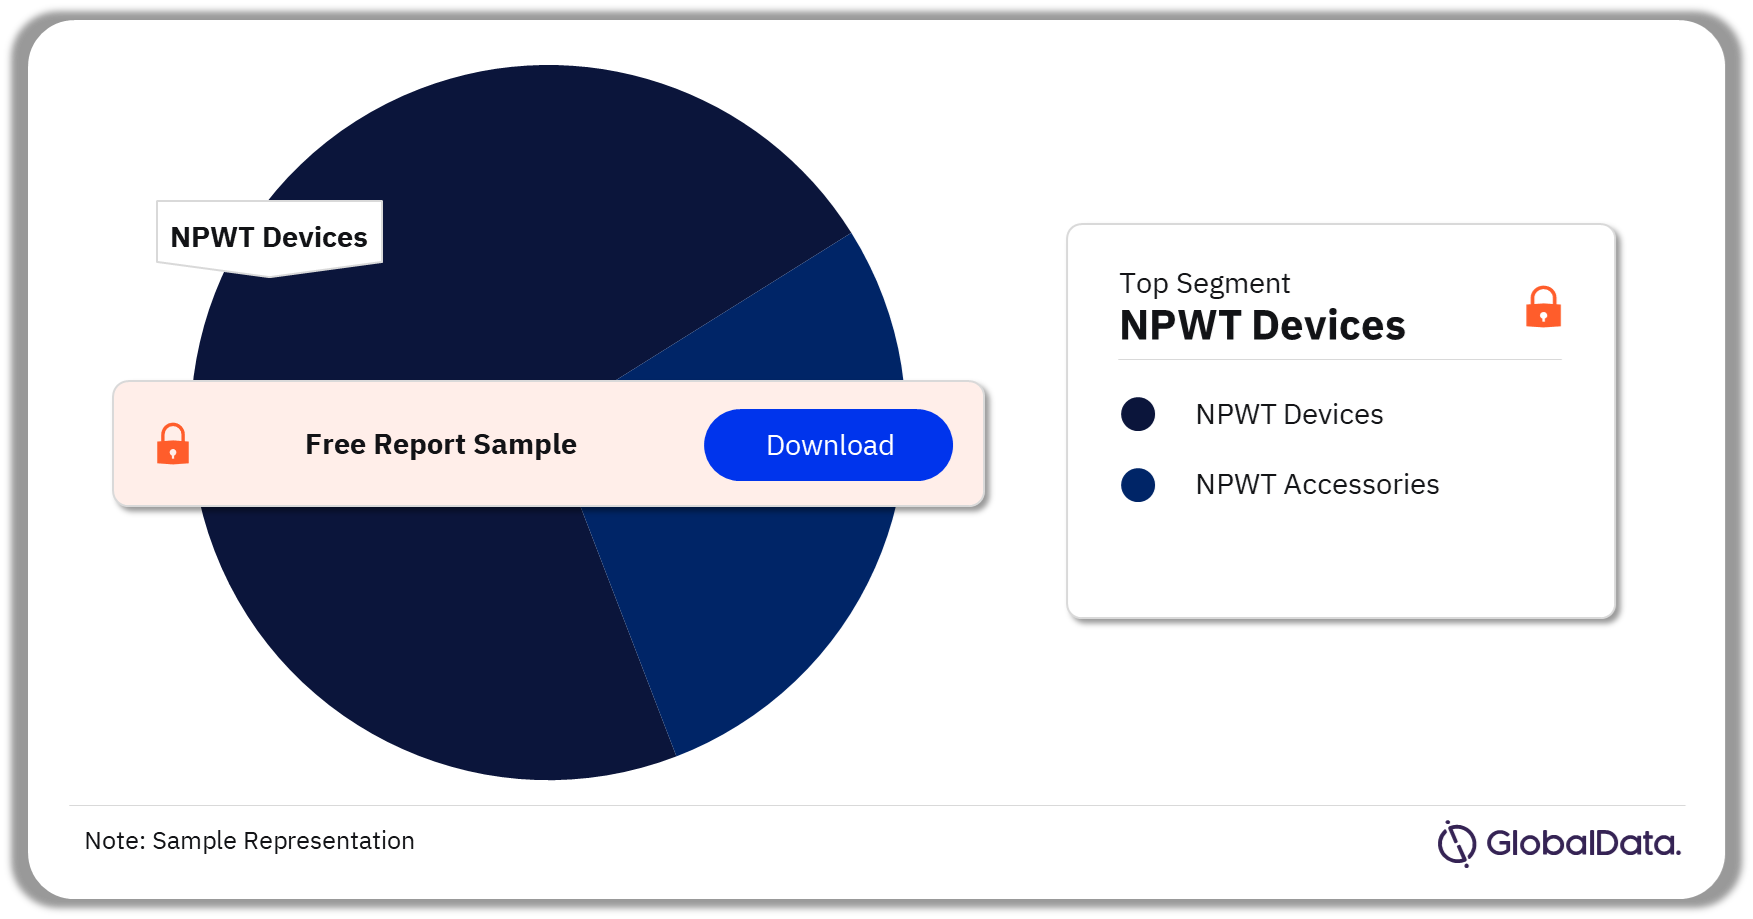 NPWT Devices and Accessories Market Analysis by Segments, 2023 (%)